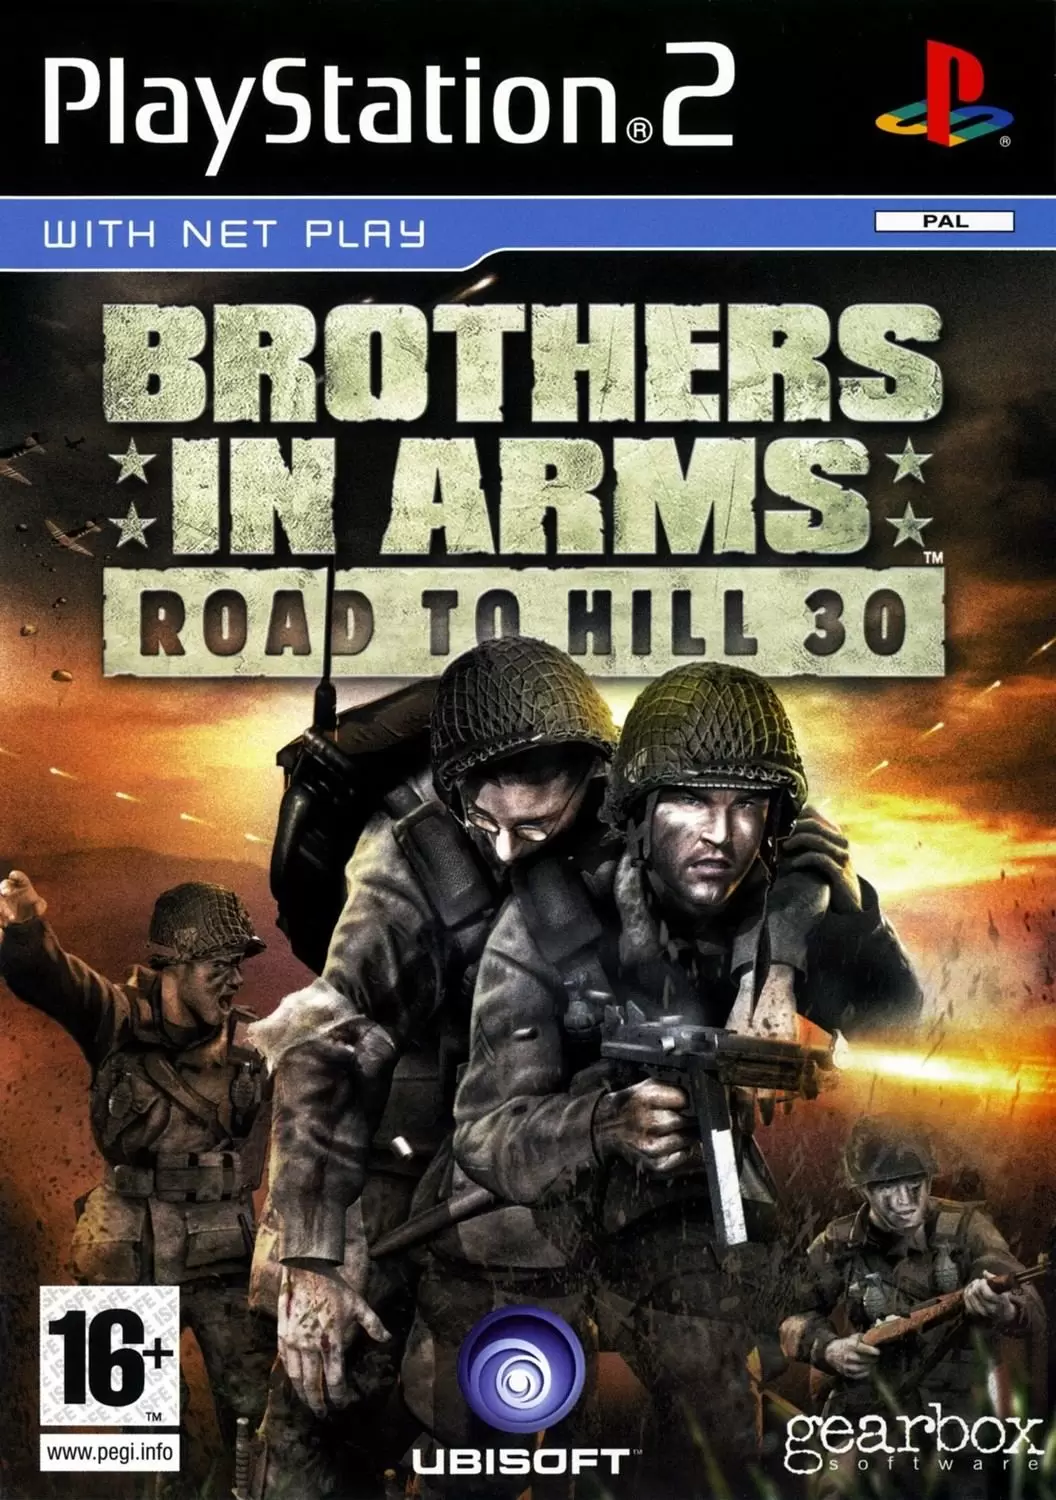 PS2 Games - Brothers in Arms: Road to Hill 30